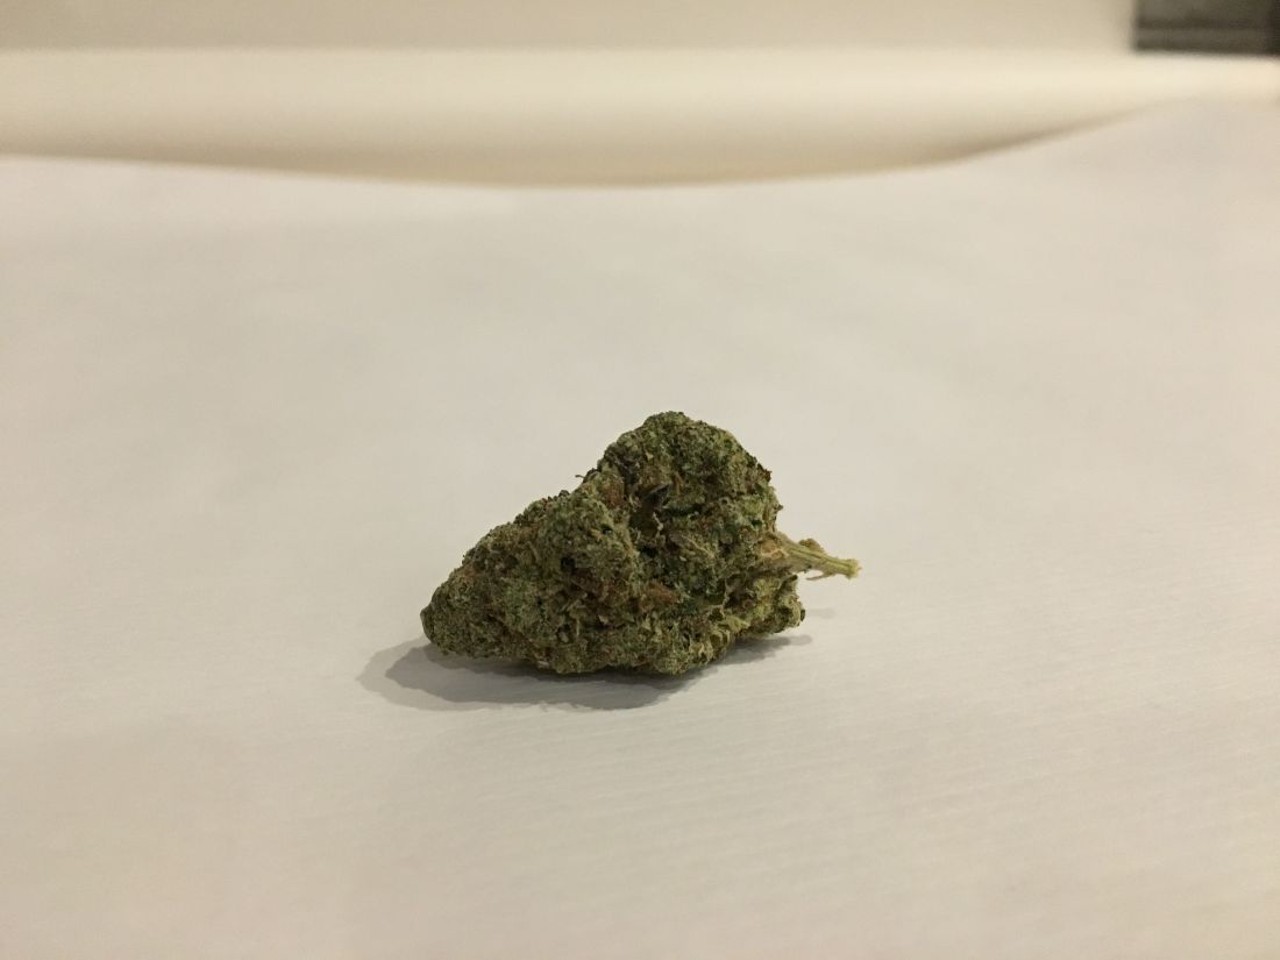 House of dank
Triple OG
indica organic indoor 30% THC
This strain offers a high unlike any other you may have encountered before &#151; starting from the head, and gradually overwhelming your body. 
3340 Eight Mile Rd., Detroit; houseofdank313.com; 313-305-4040.